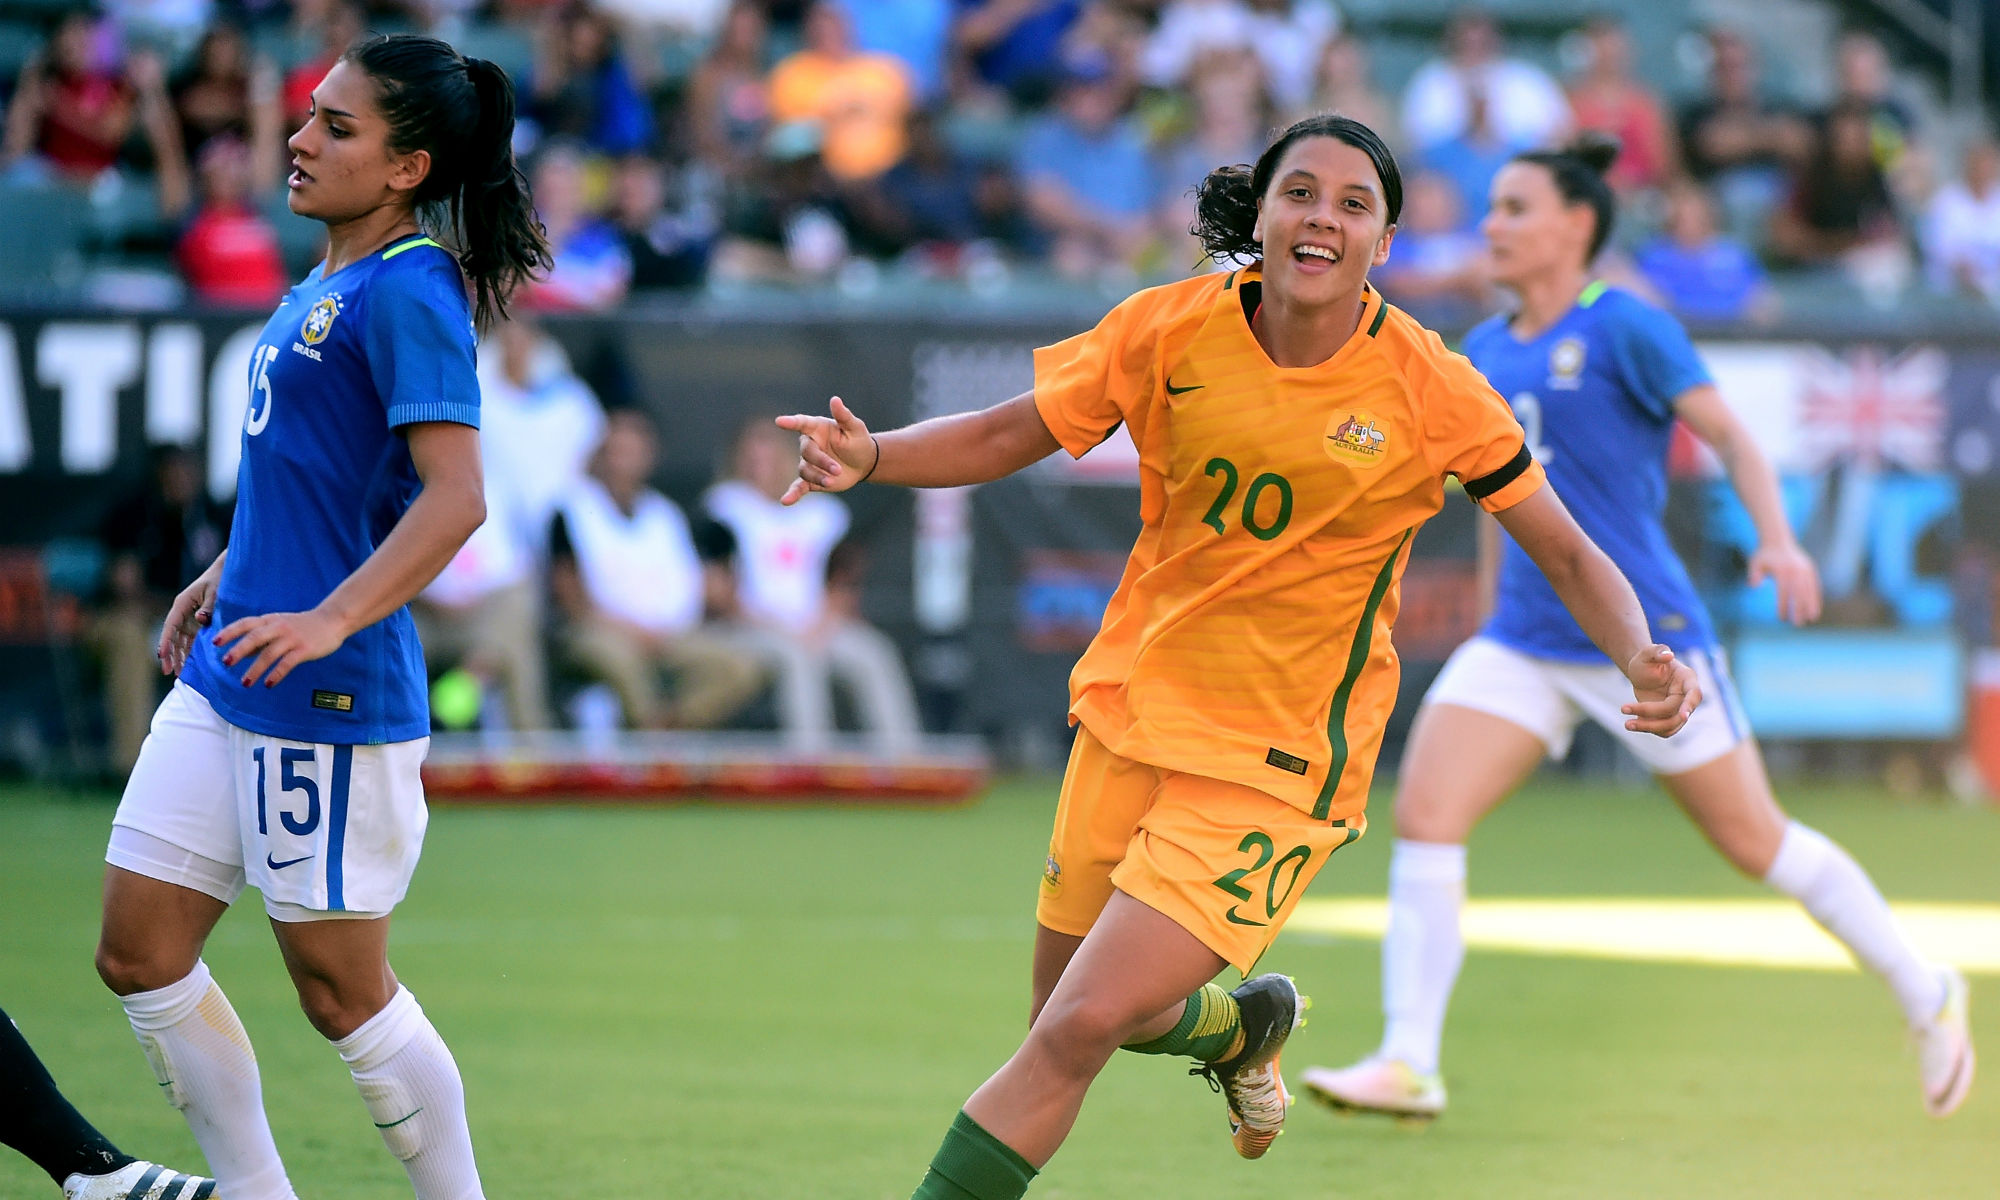 Sam Kerr puts the Matildas 3-1 up against Brazil in the 2018 Tournament of Nations